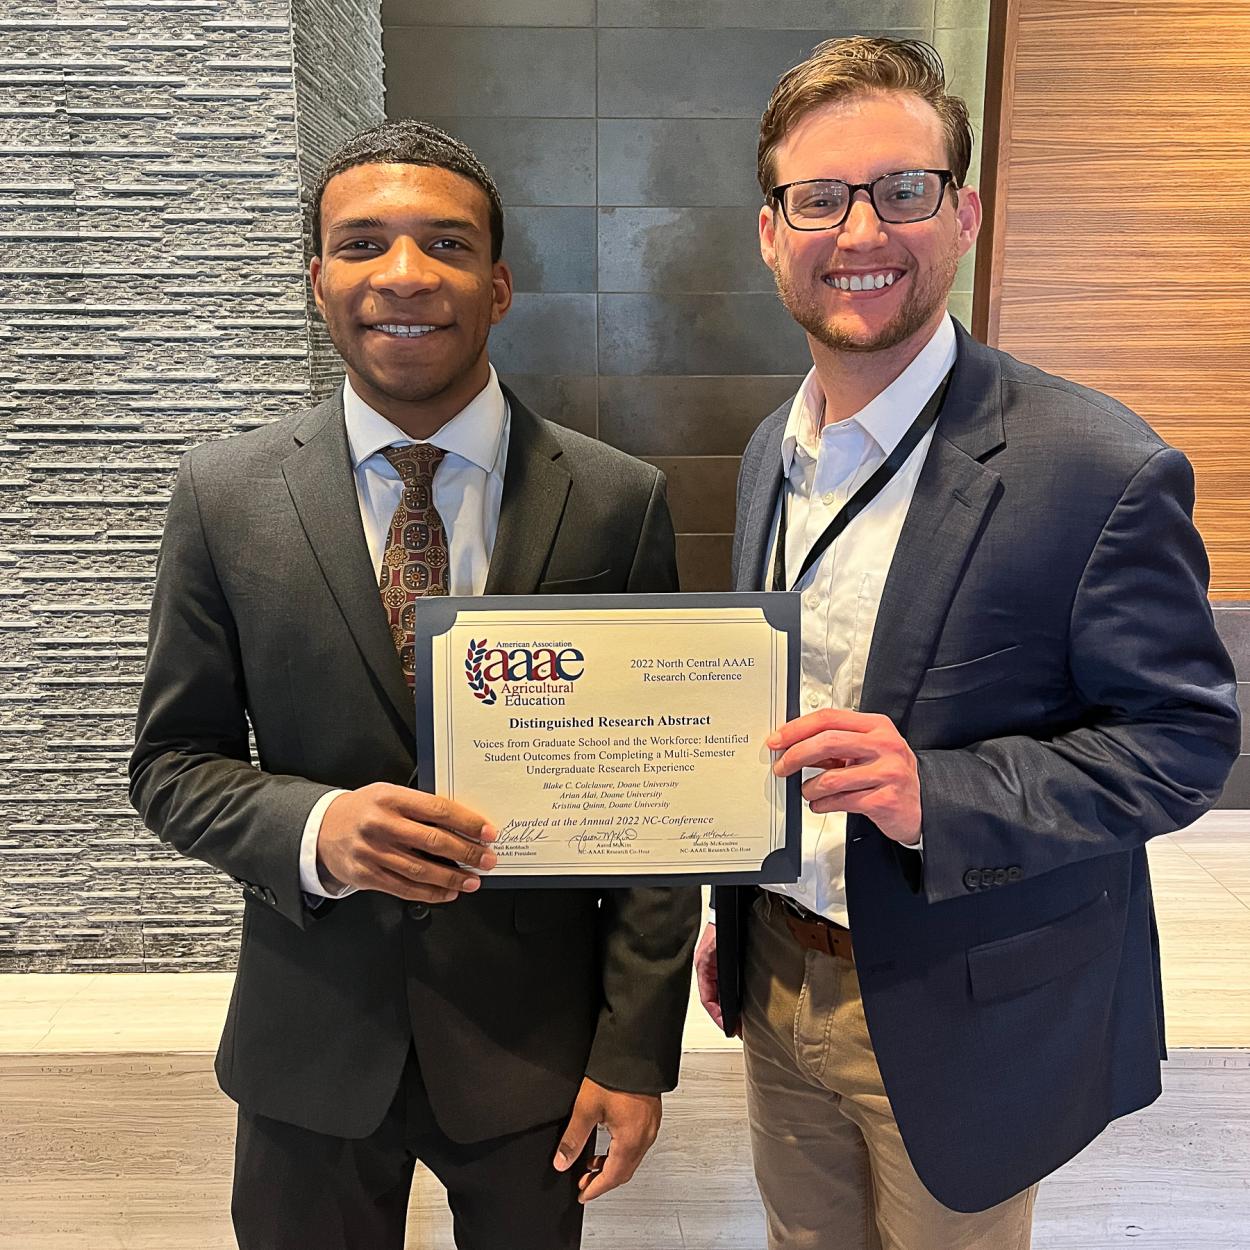 Arian Alai ’23 stands in a grey suit, white shirt and red and yellow tie next to Dr. Blake Colclasure, who wears a blue jacket over a white shirt and khaki pants. They hold an award that reads "Distinguished Research Abstract."